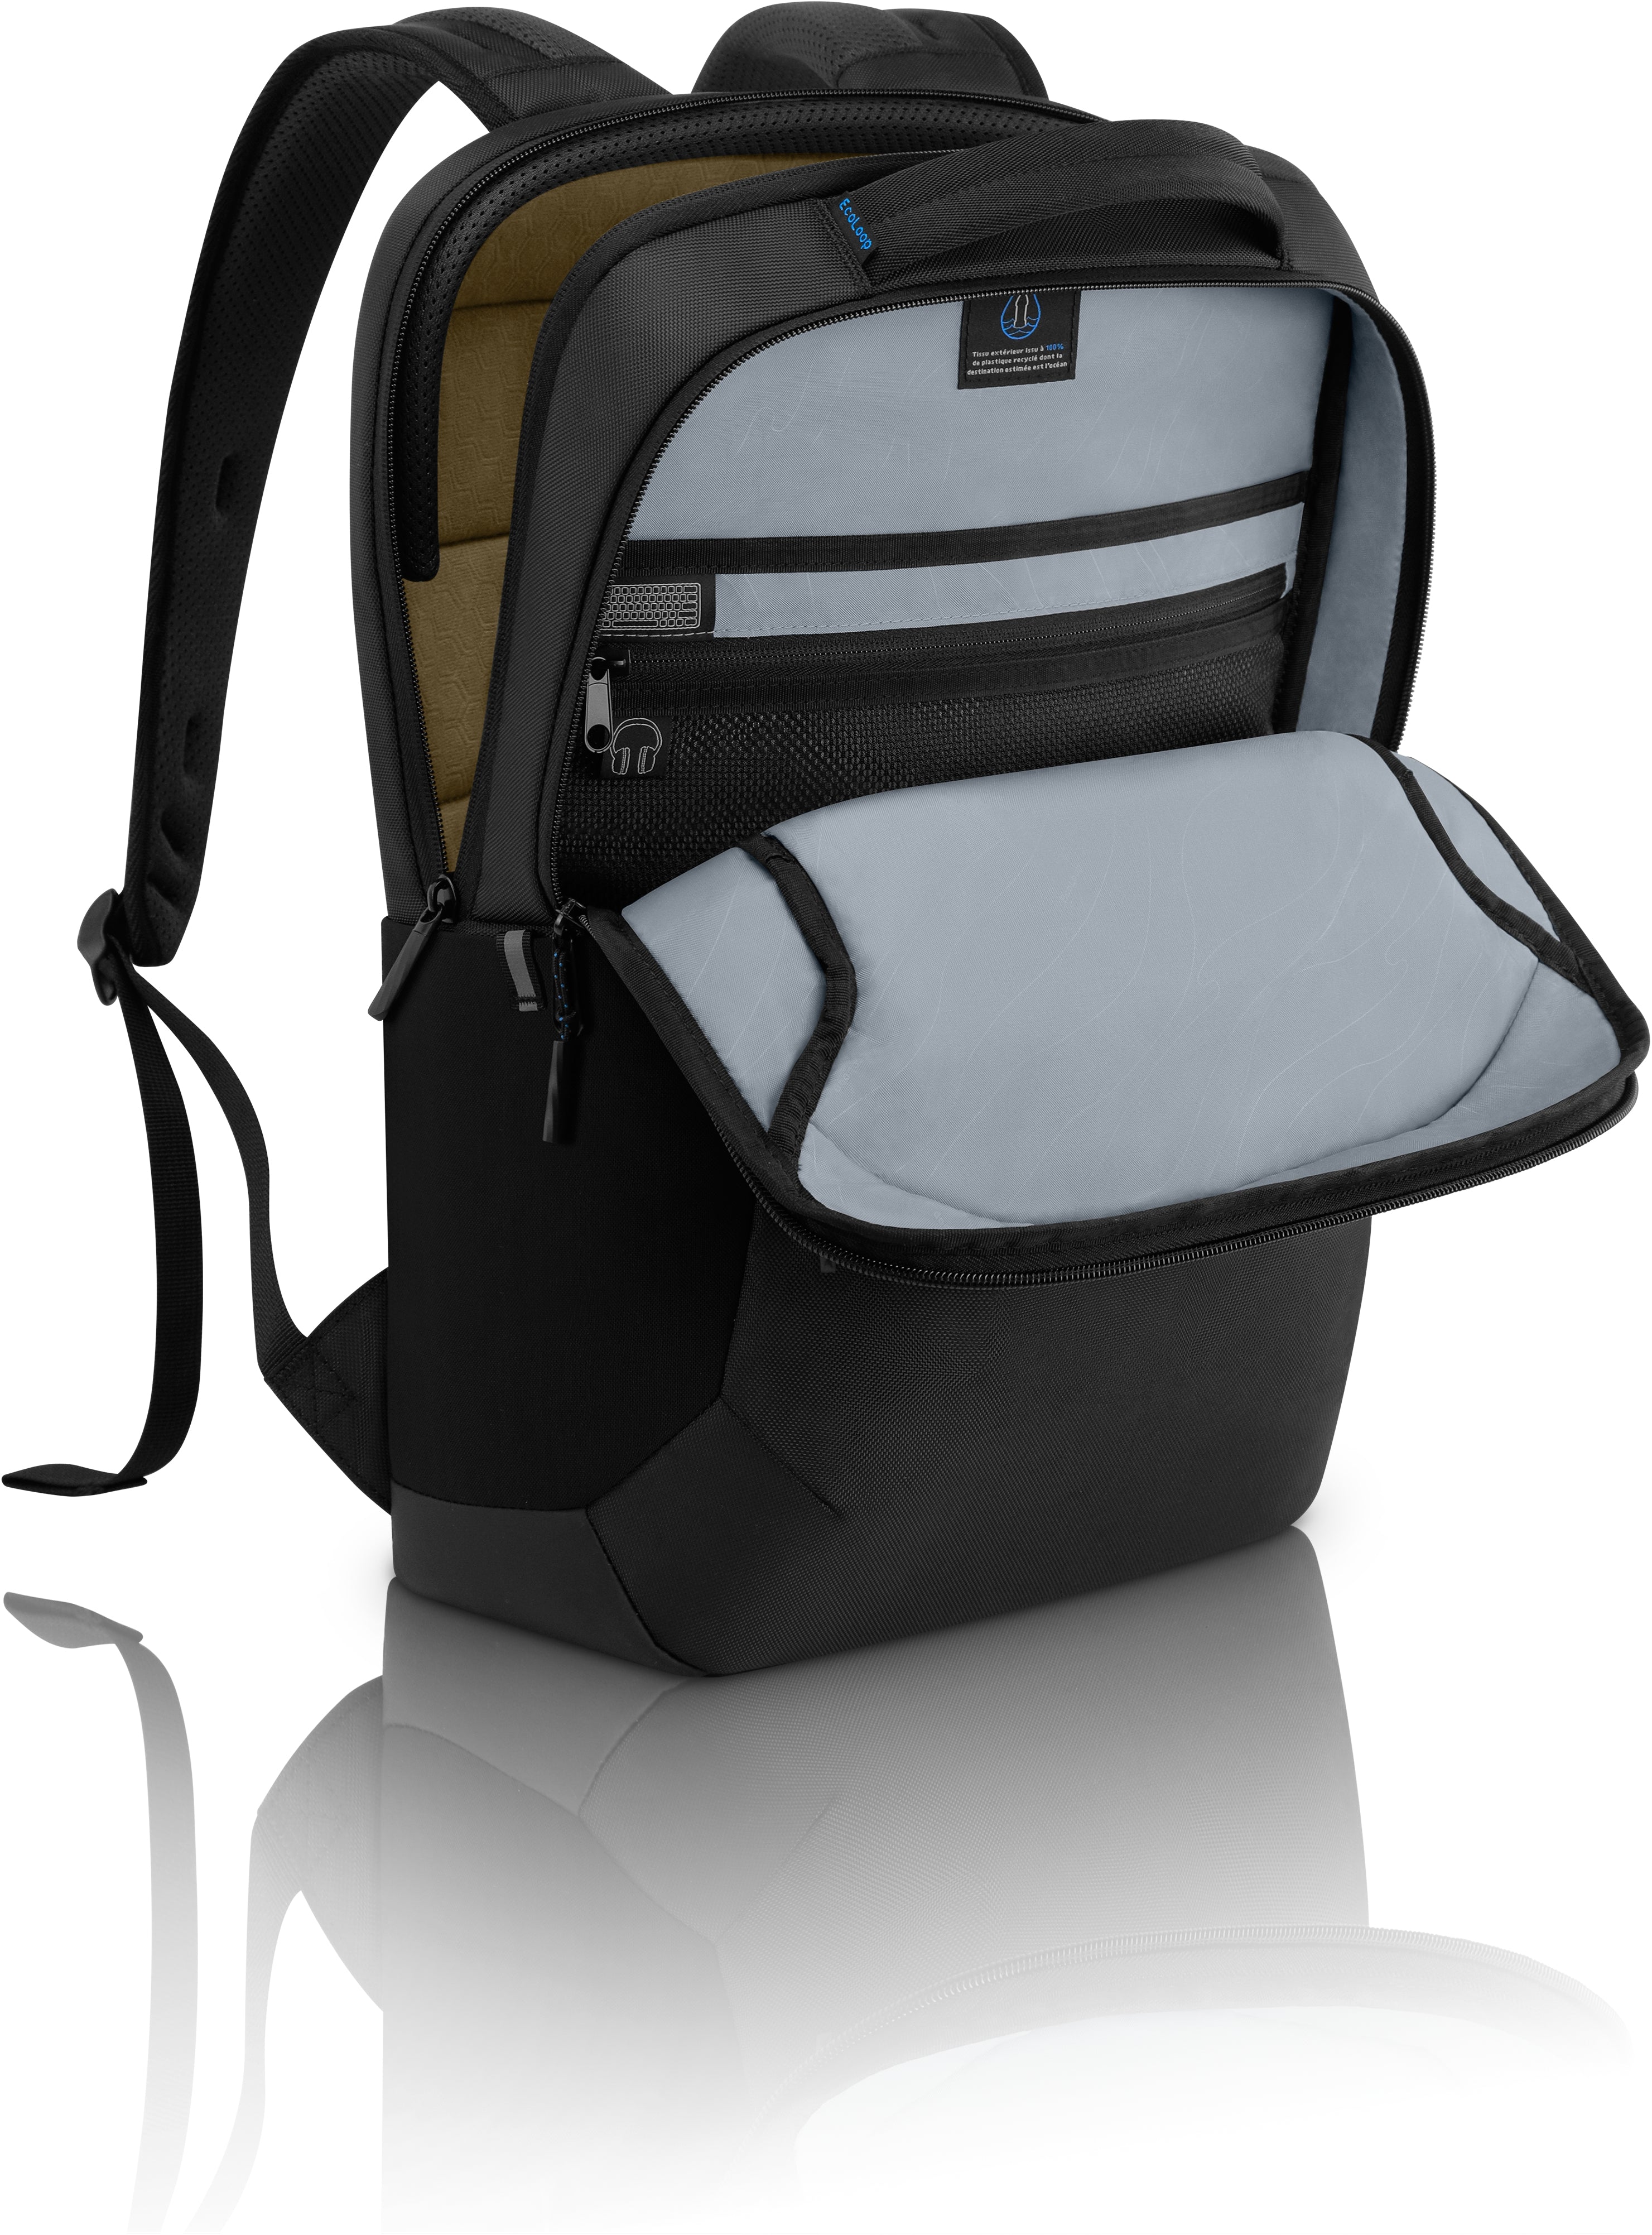 Dell EcoLoop Pro Backpack For 17" Notebook - Black